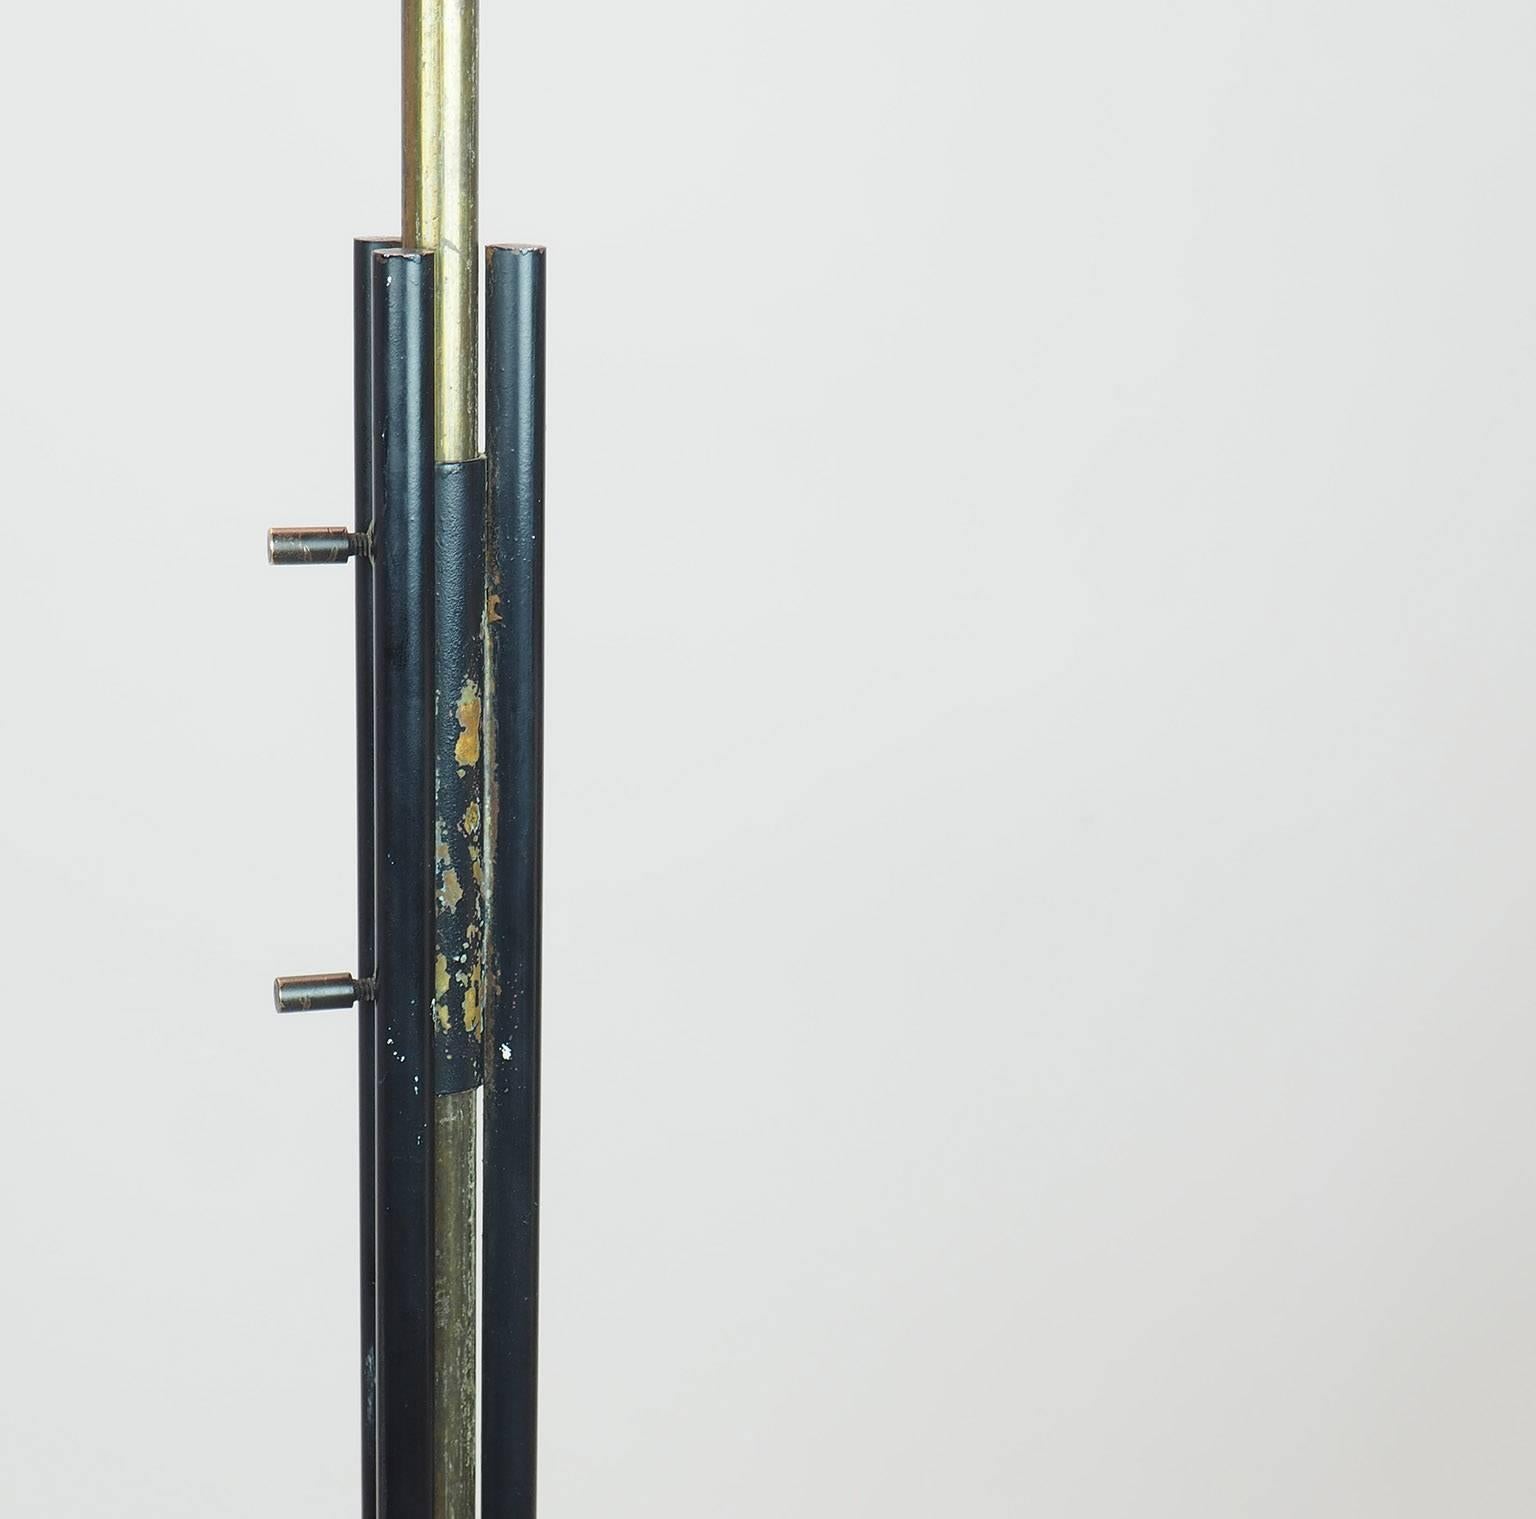 Lacquered Tito Agnoli Adjustable Floor Lamp with Black Conic Reflector, Milano, 1950s For Sale